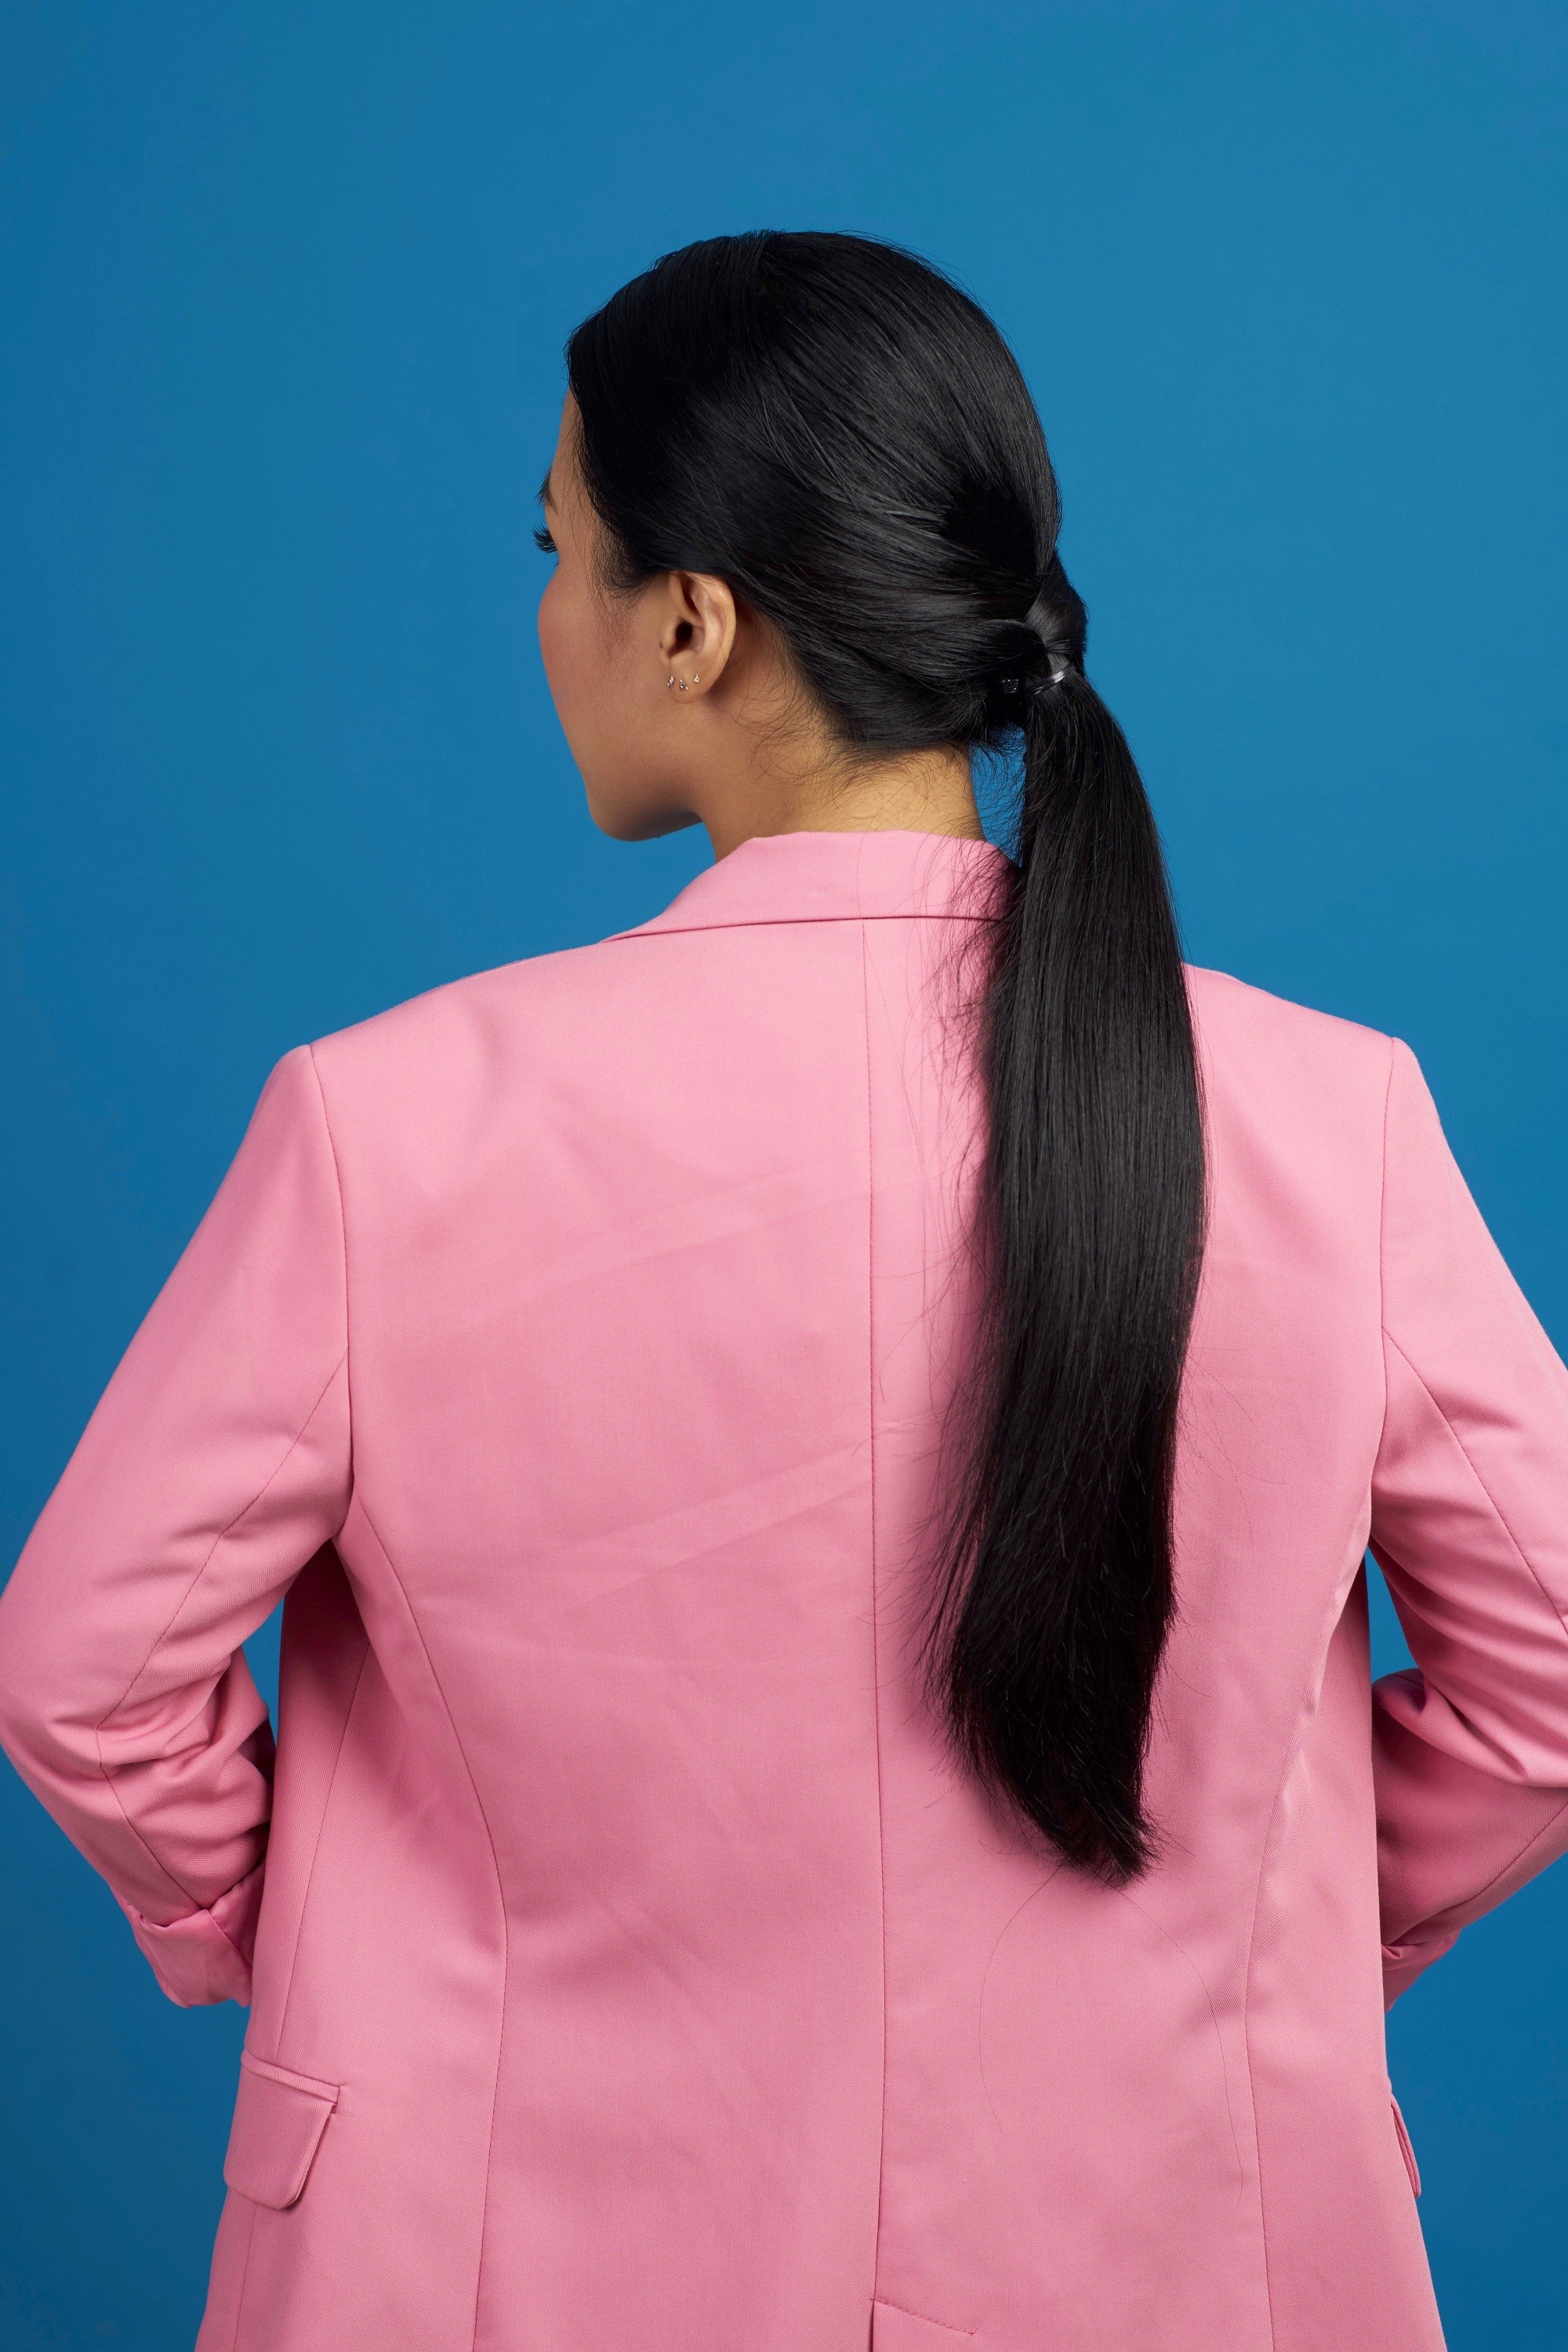 Back shot of an Asian woman with long black hair wearing a pink suitwi